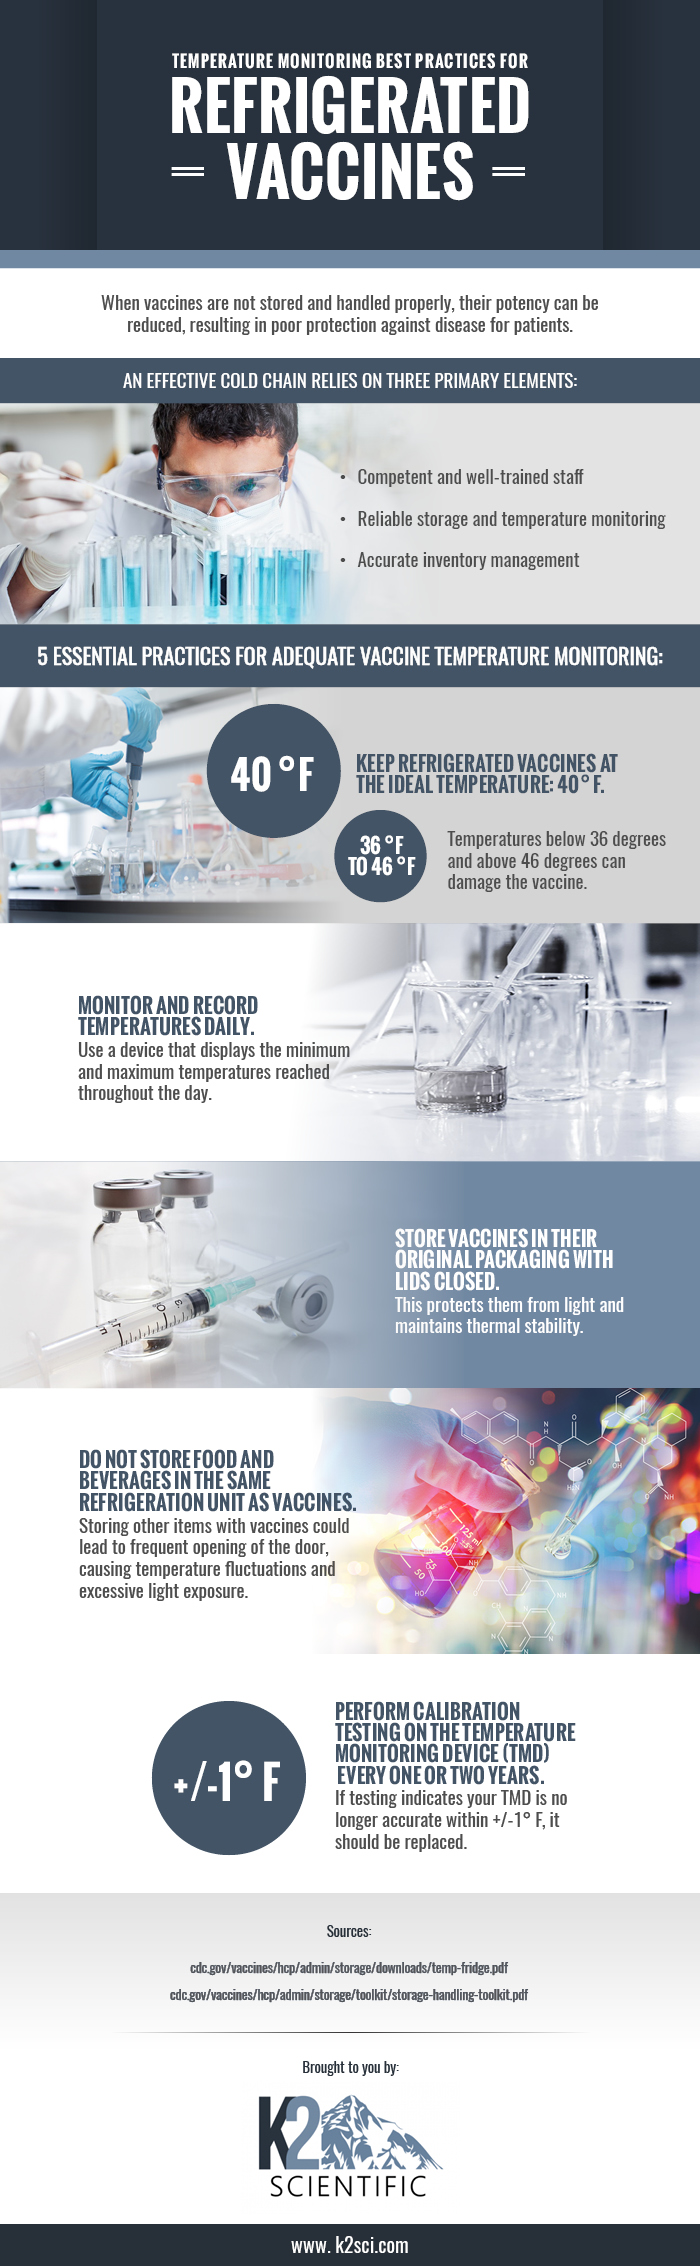 Infographic on Refrigerated Vaccines